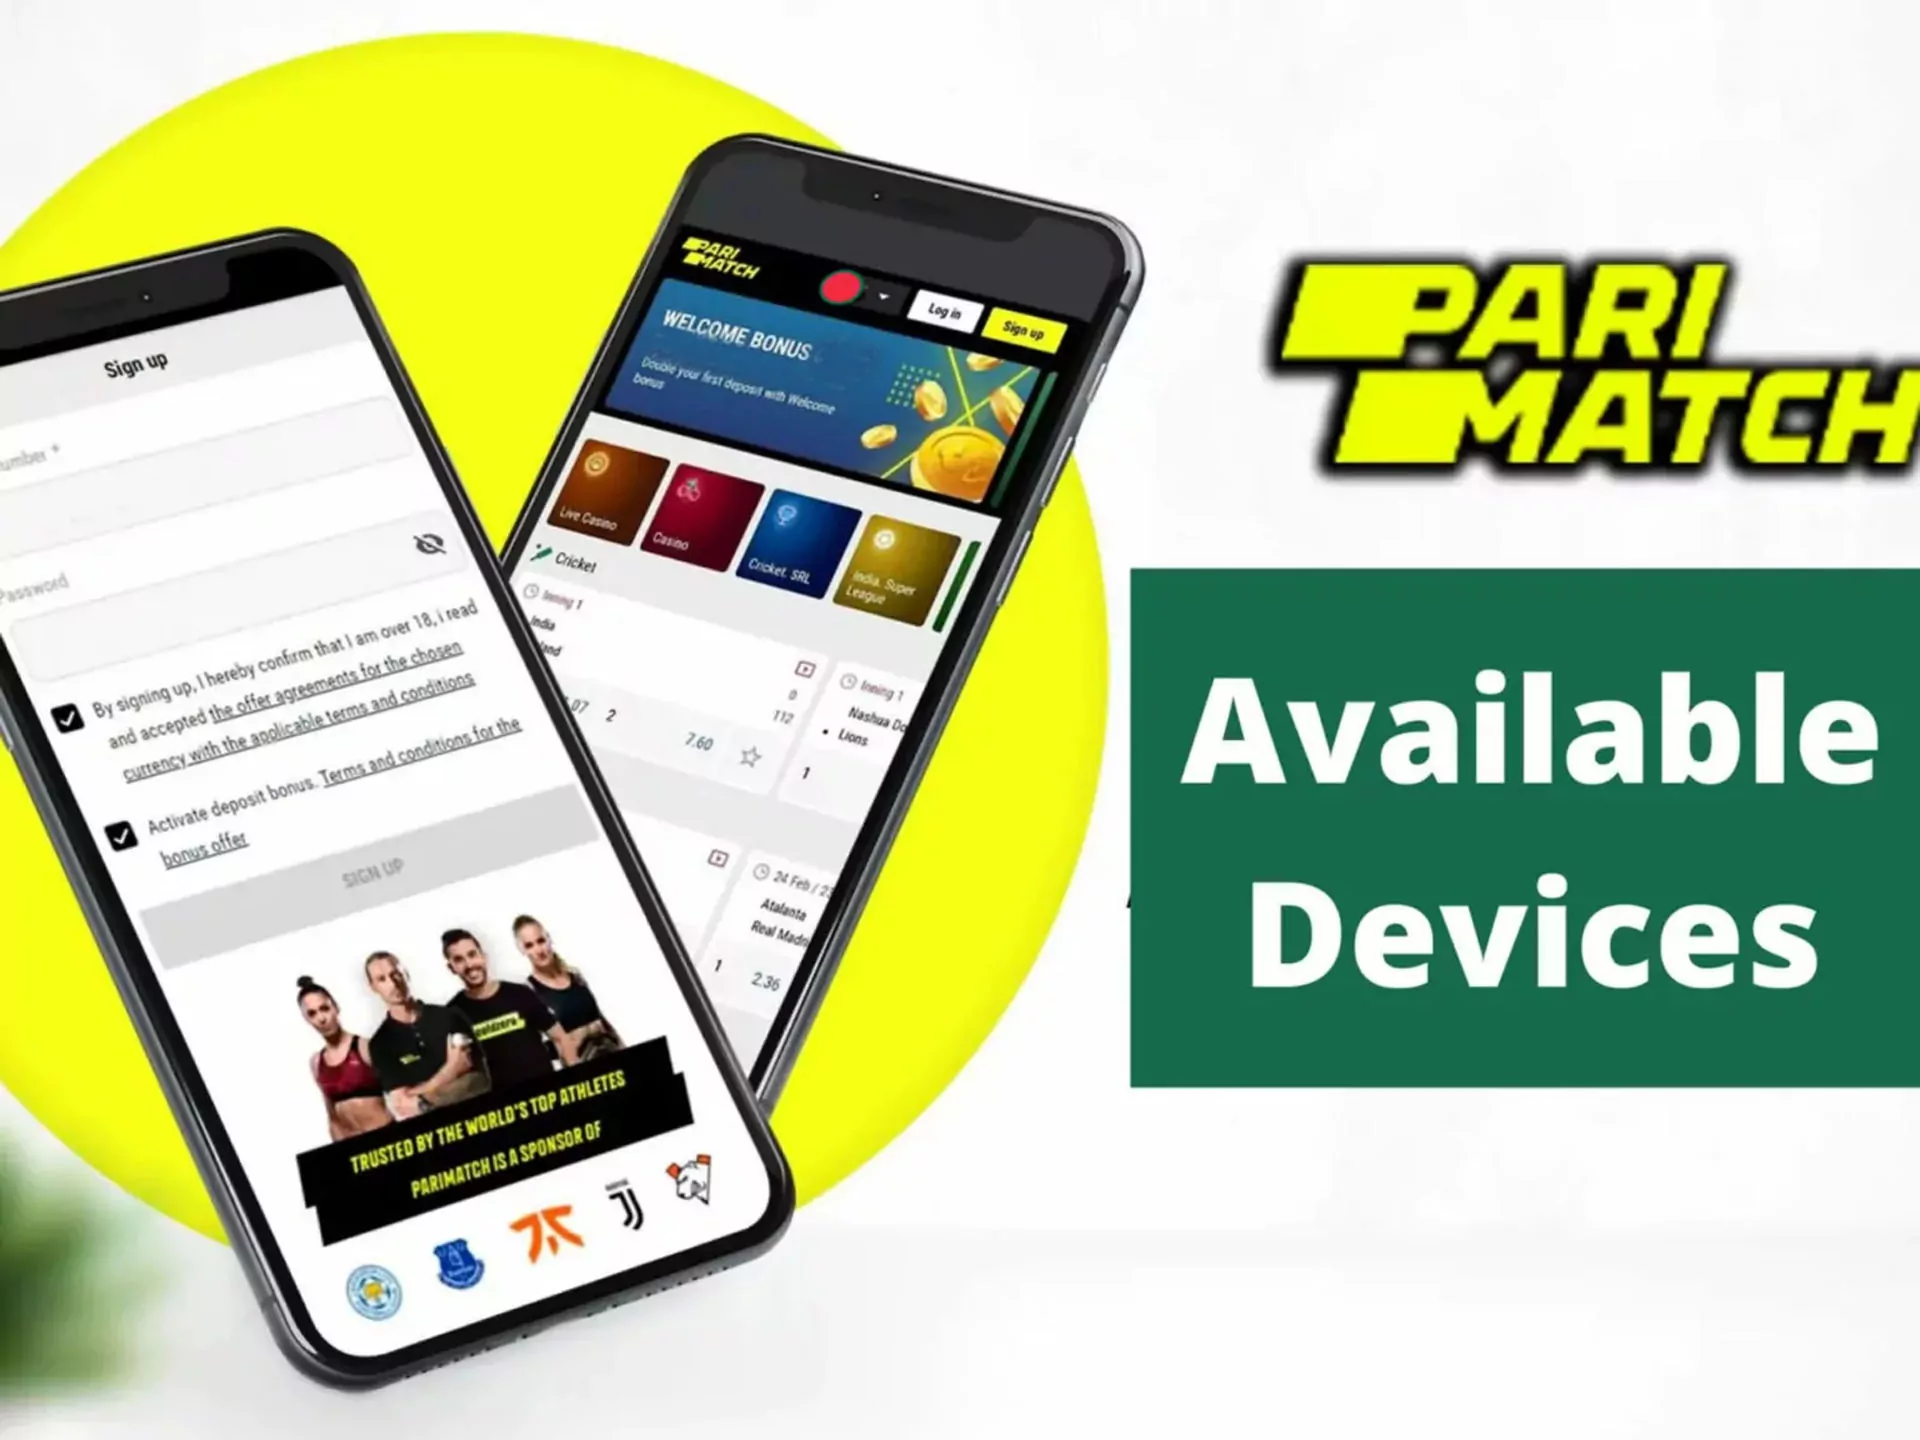 Android devices for parimatch apk.